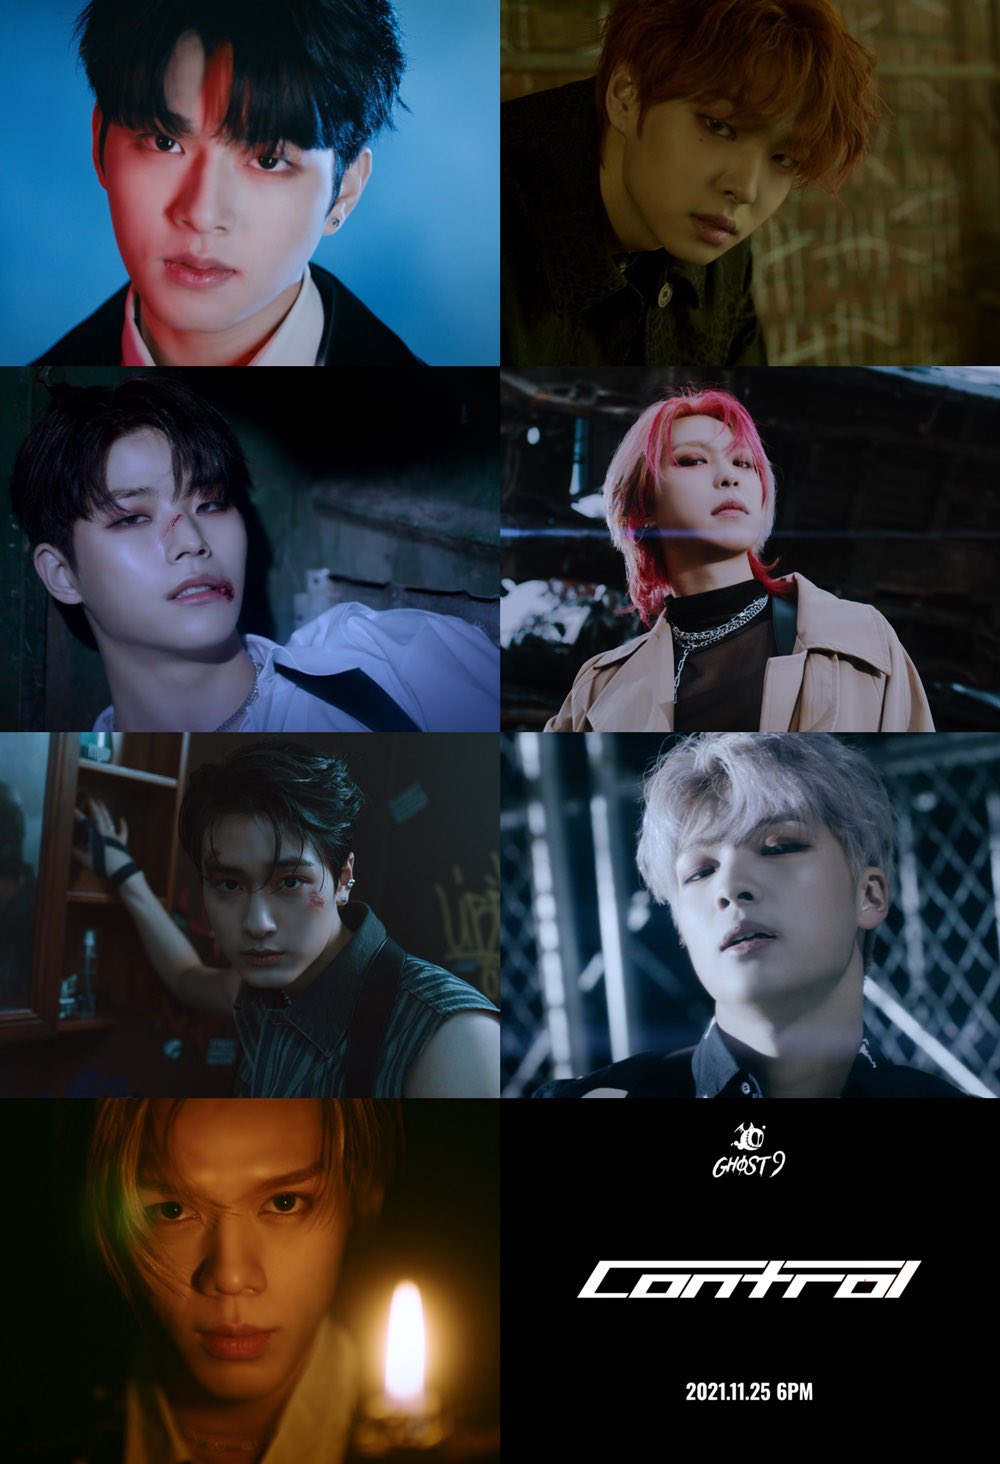 GHOST9, new song ‘Control’ performance preview… Delicate dance line + dynamic energy